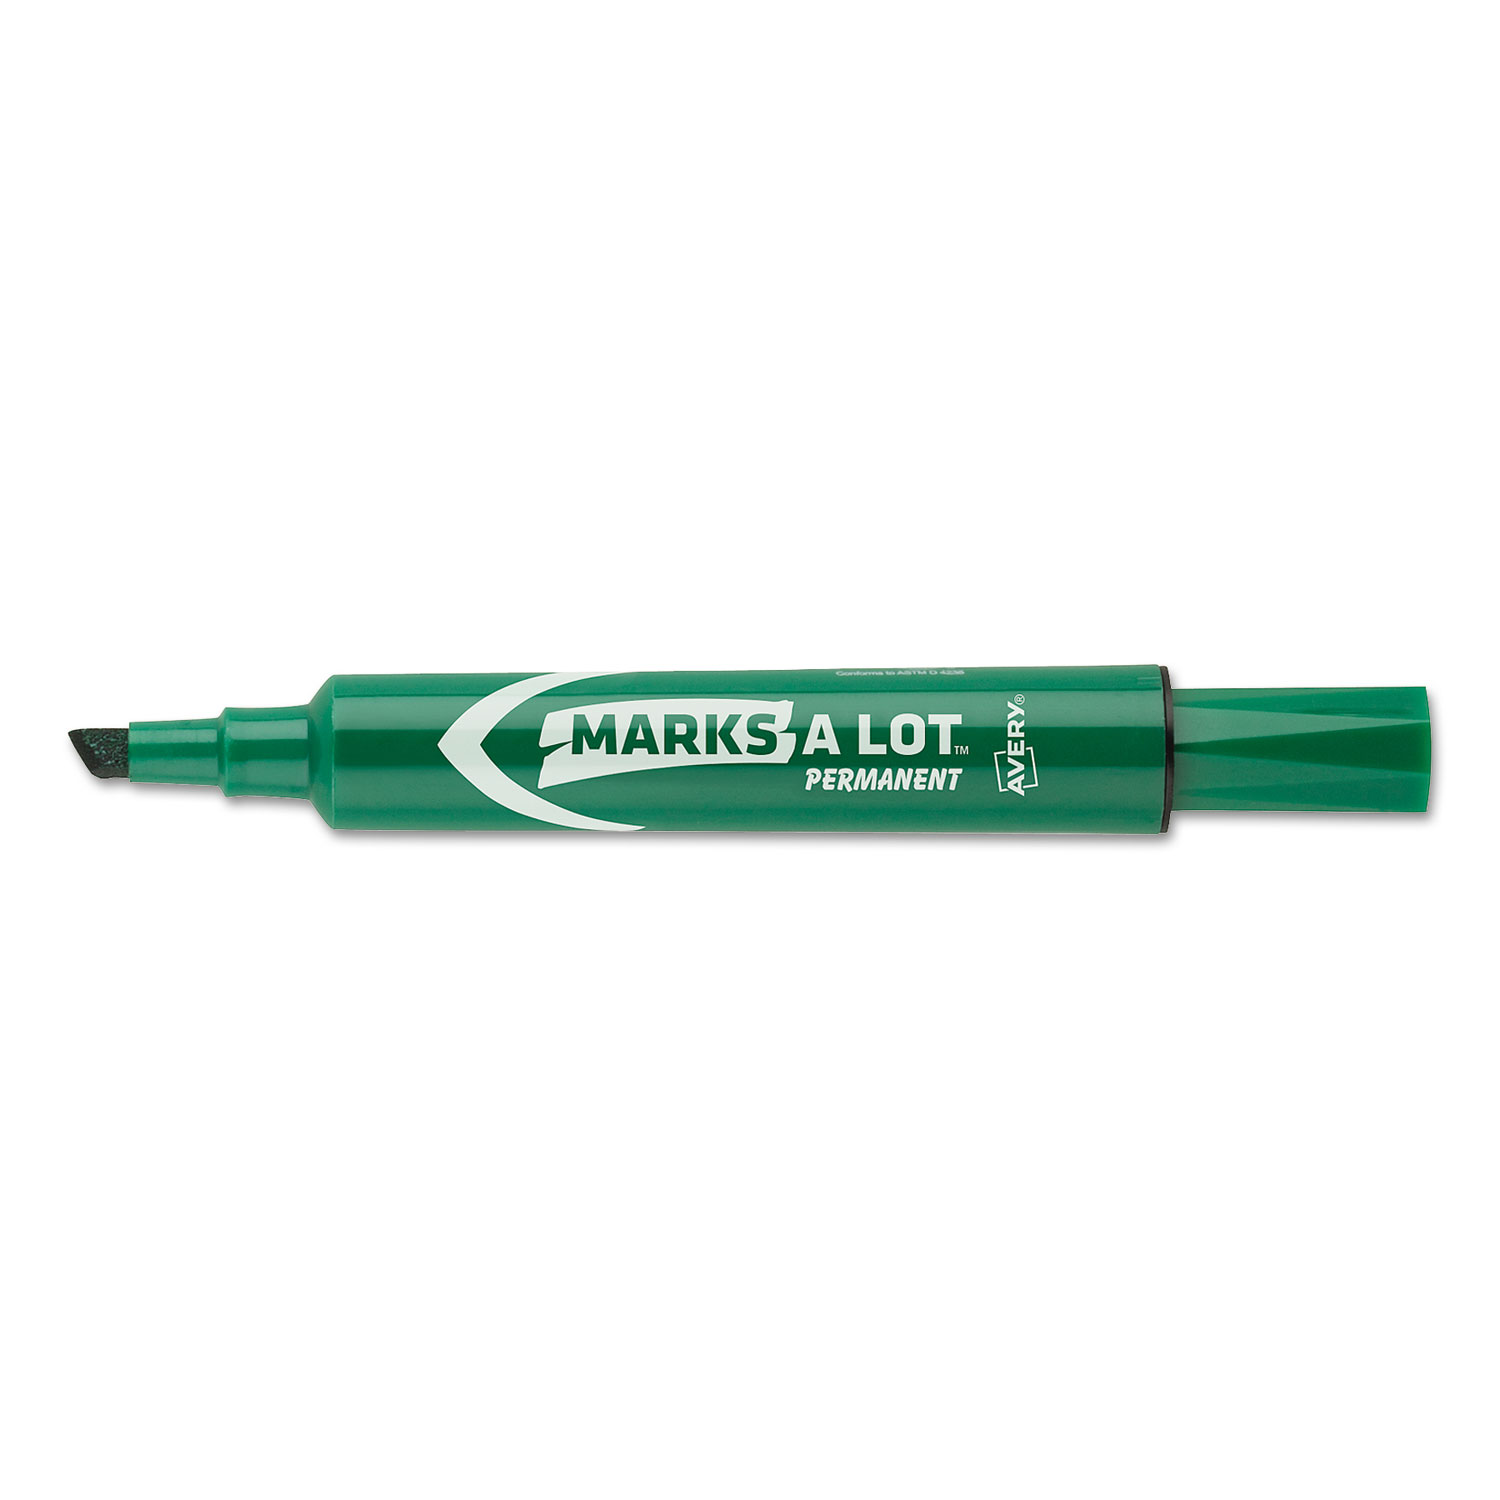  Avery 08885 MARKS A LOT Large Desk-Style Permanent Marker, Broad Chisel Tip, Green, Dozen (AVE08885) 